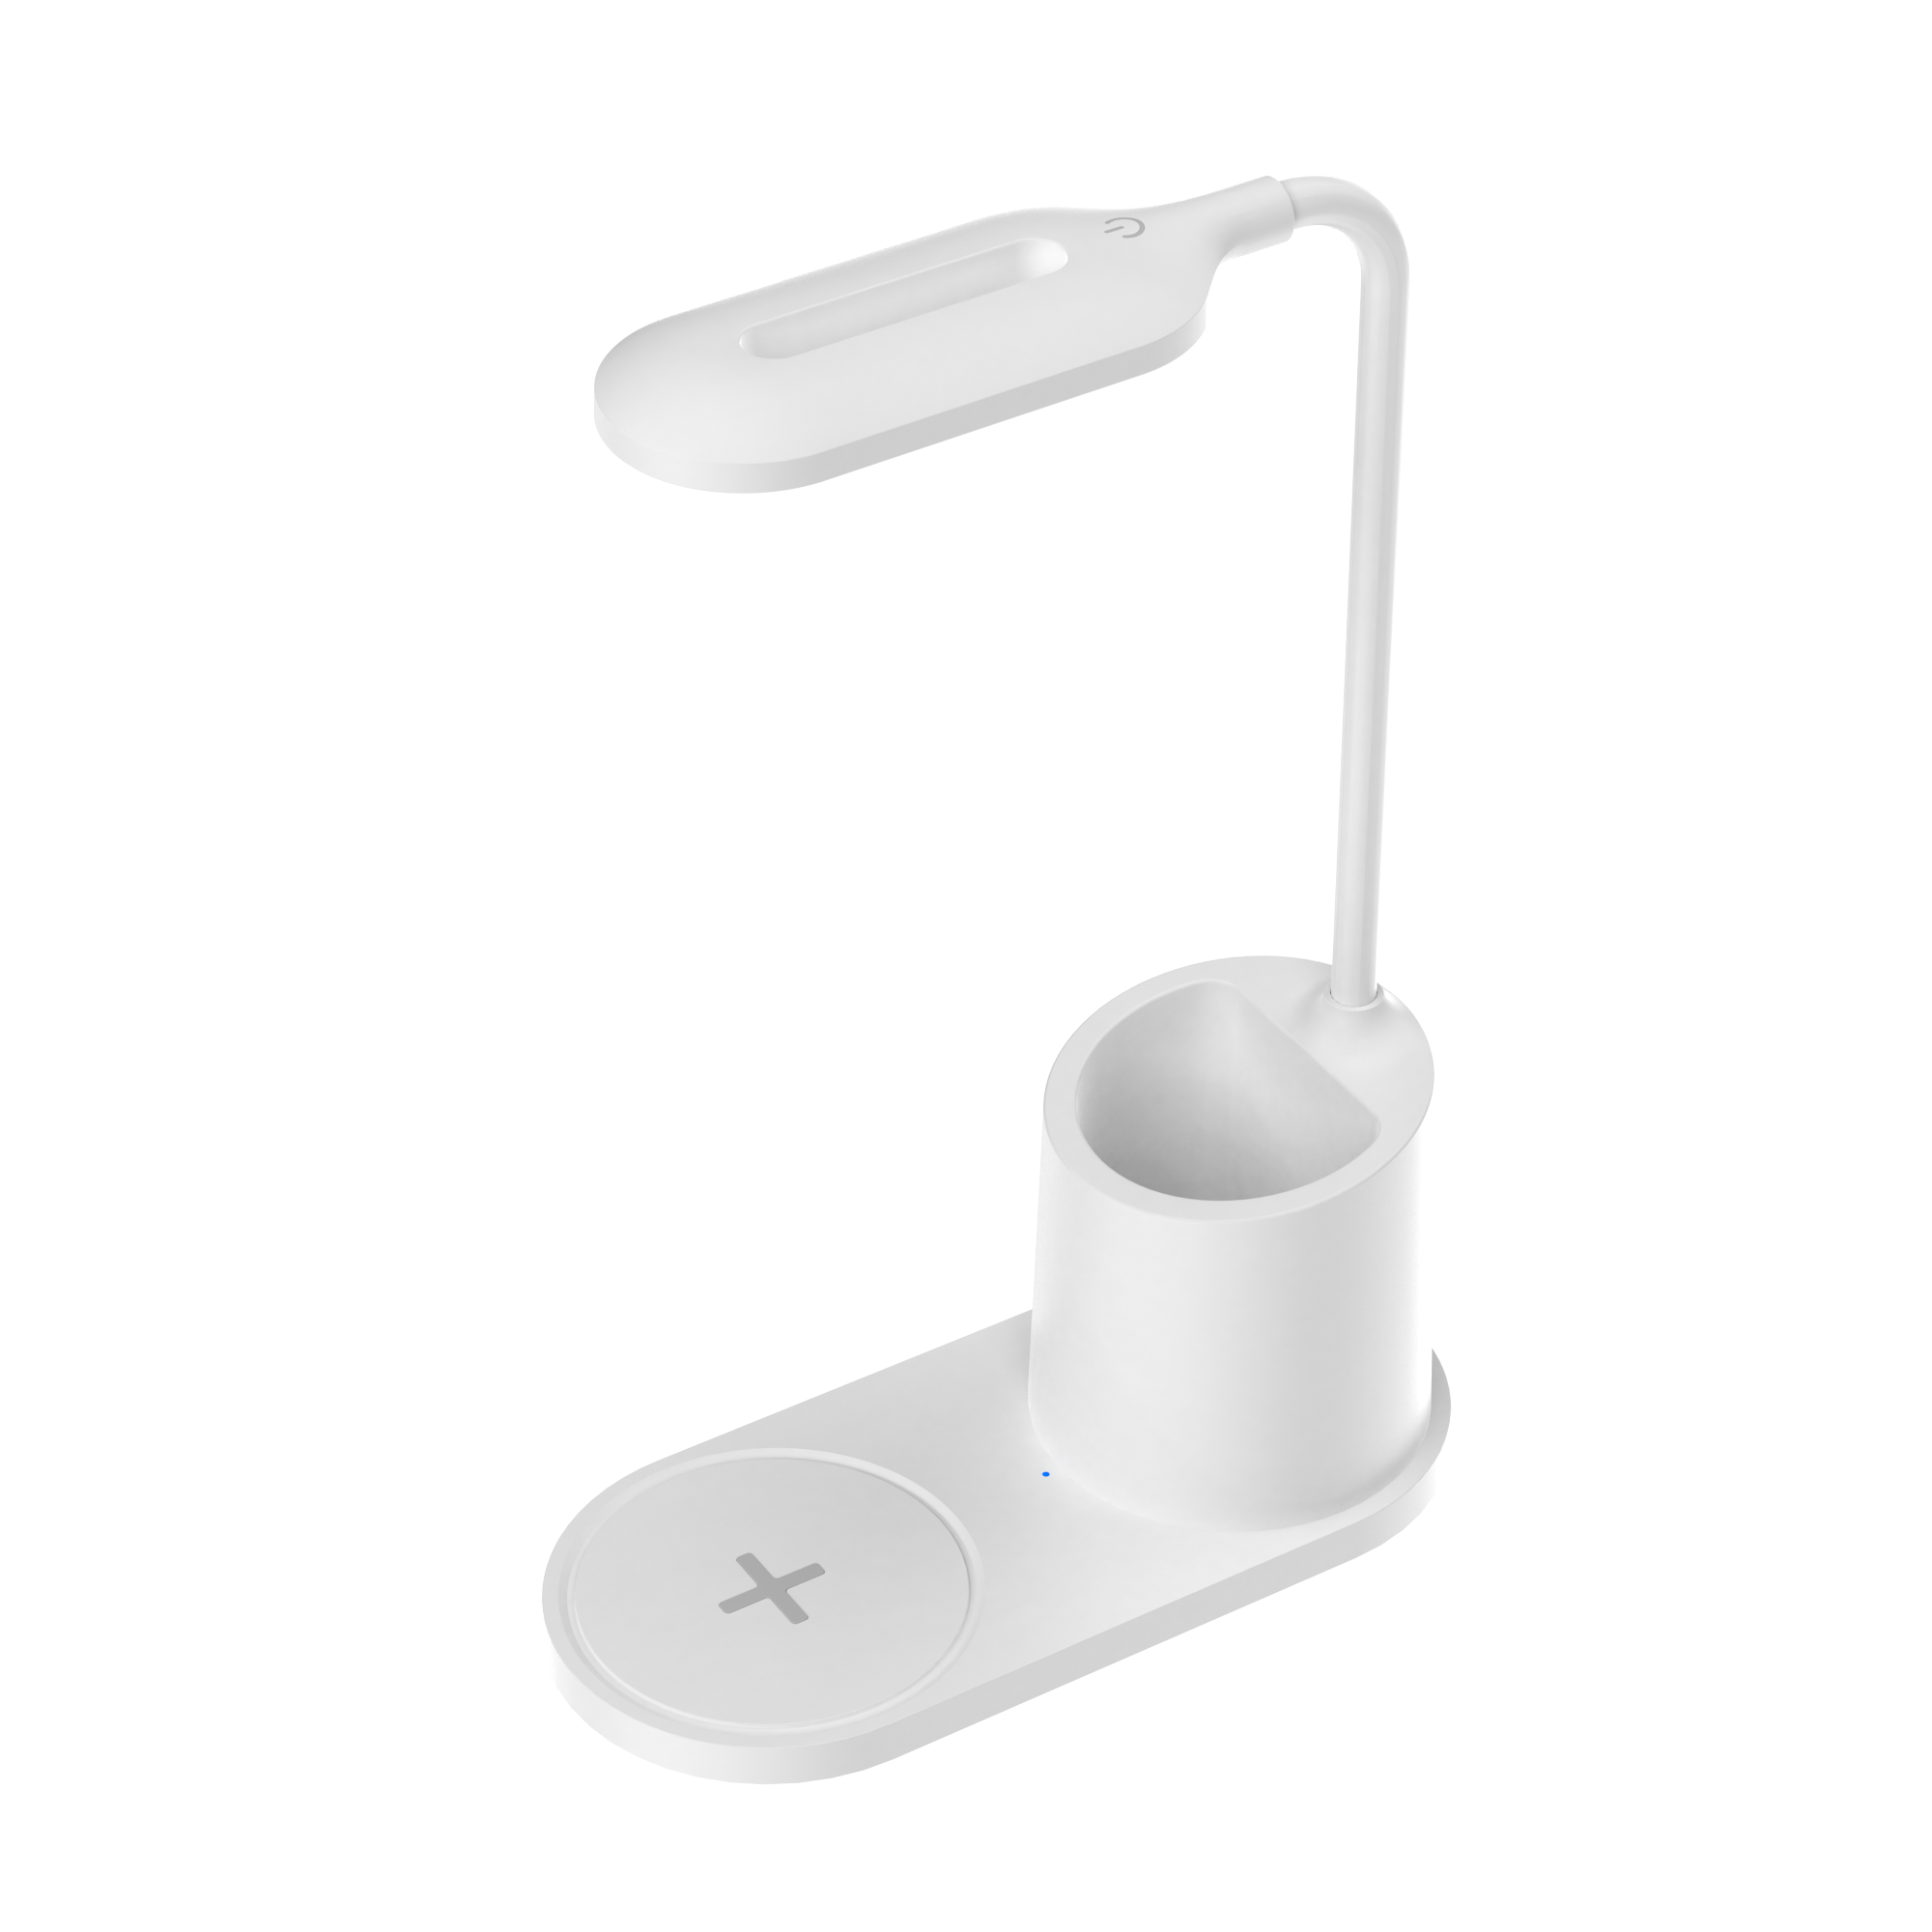 Hot Sale Table LED Lamp With Holder Iphone Wireless Charger Night Light Office Lamp Touch Switch For Study